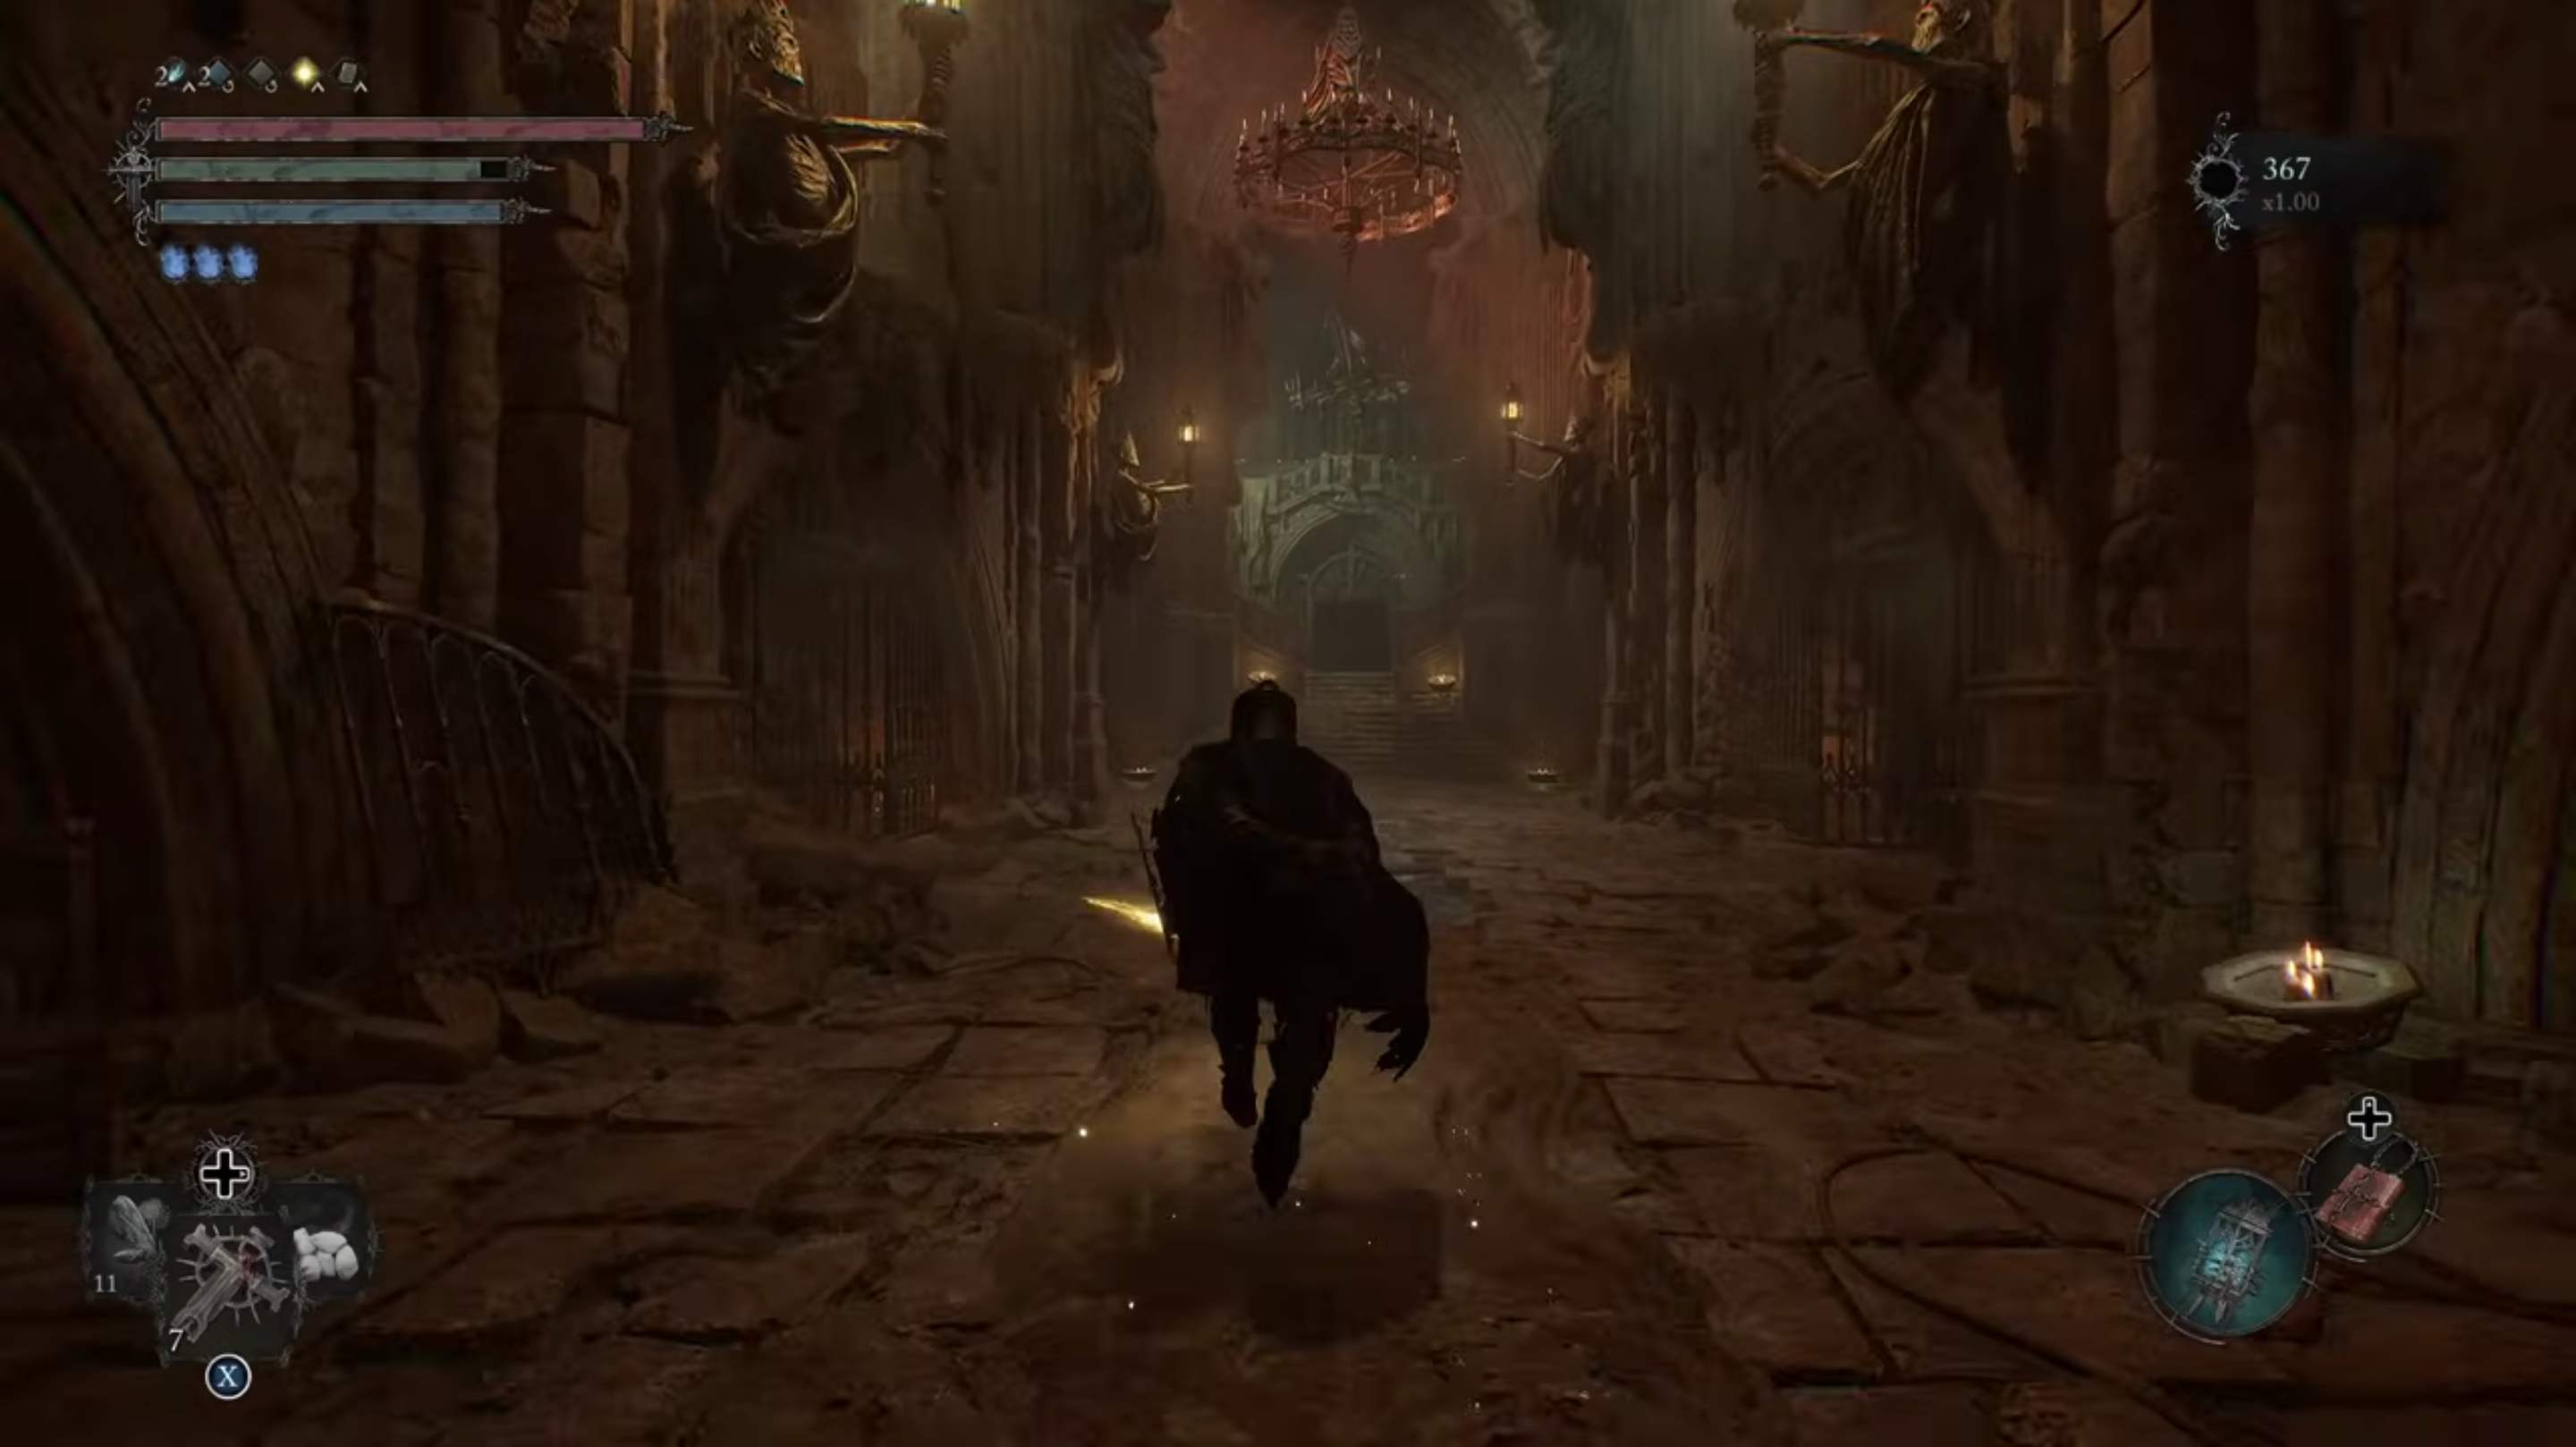 The player going towards the path directly in front of the Vestige of Ethryg